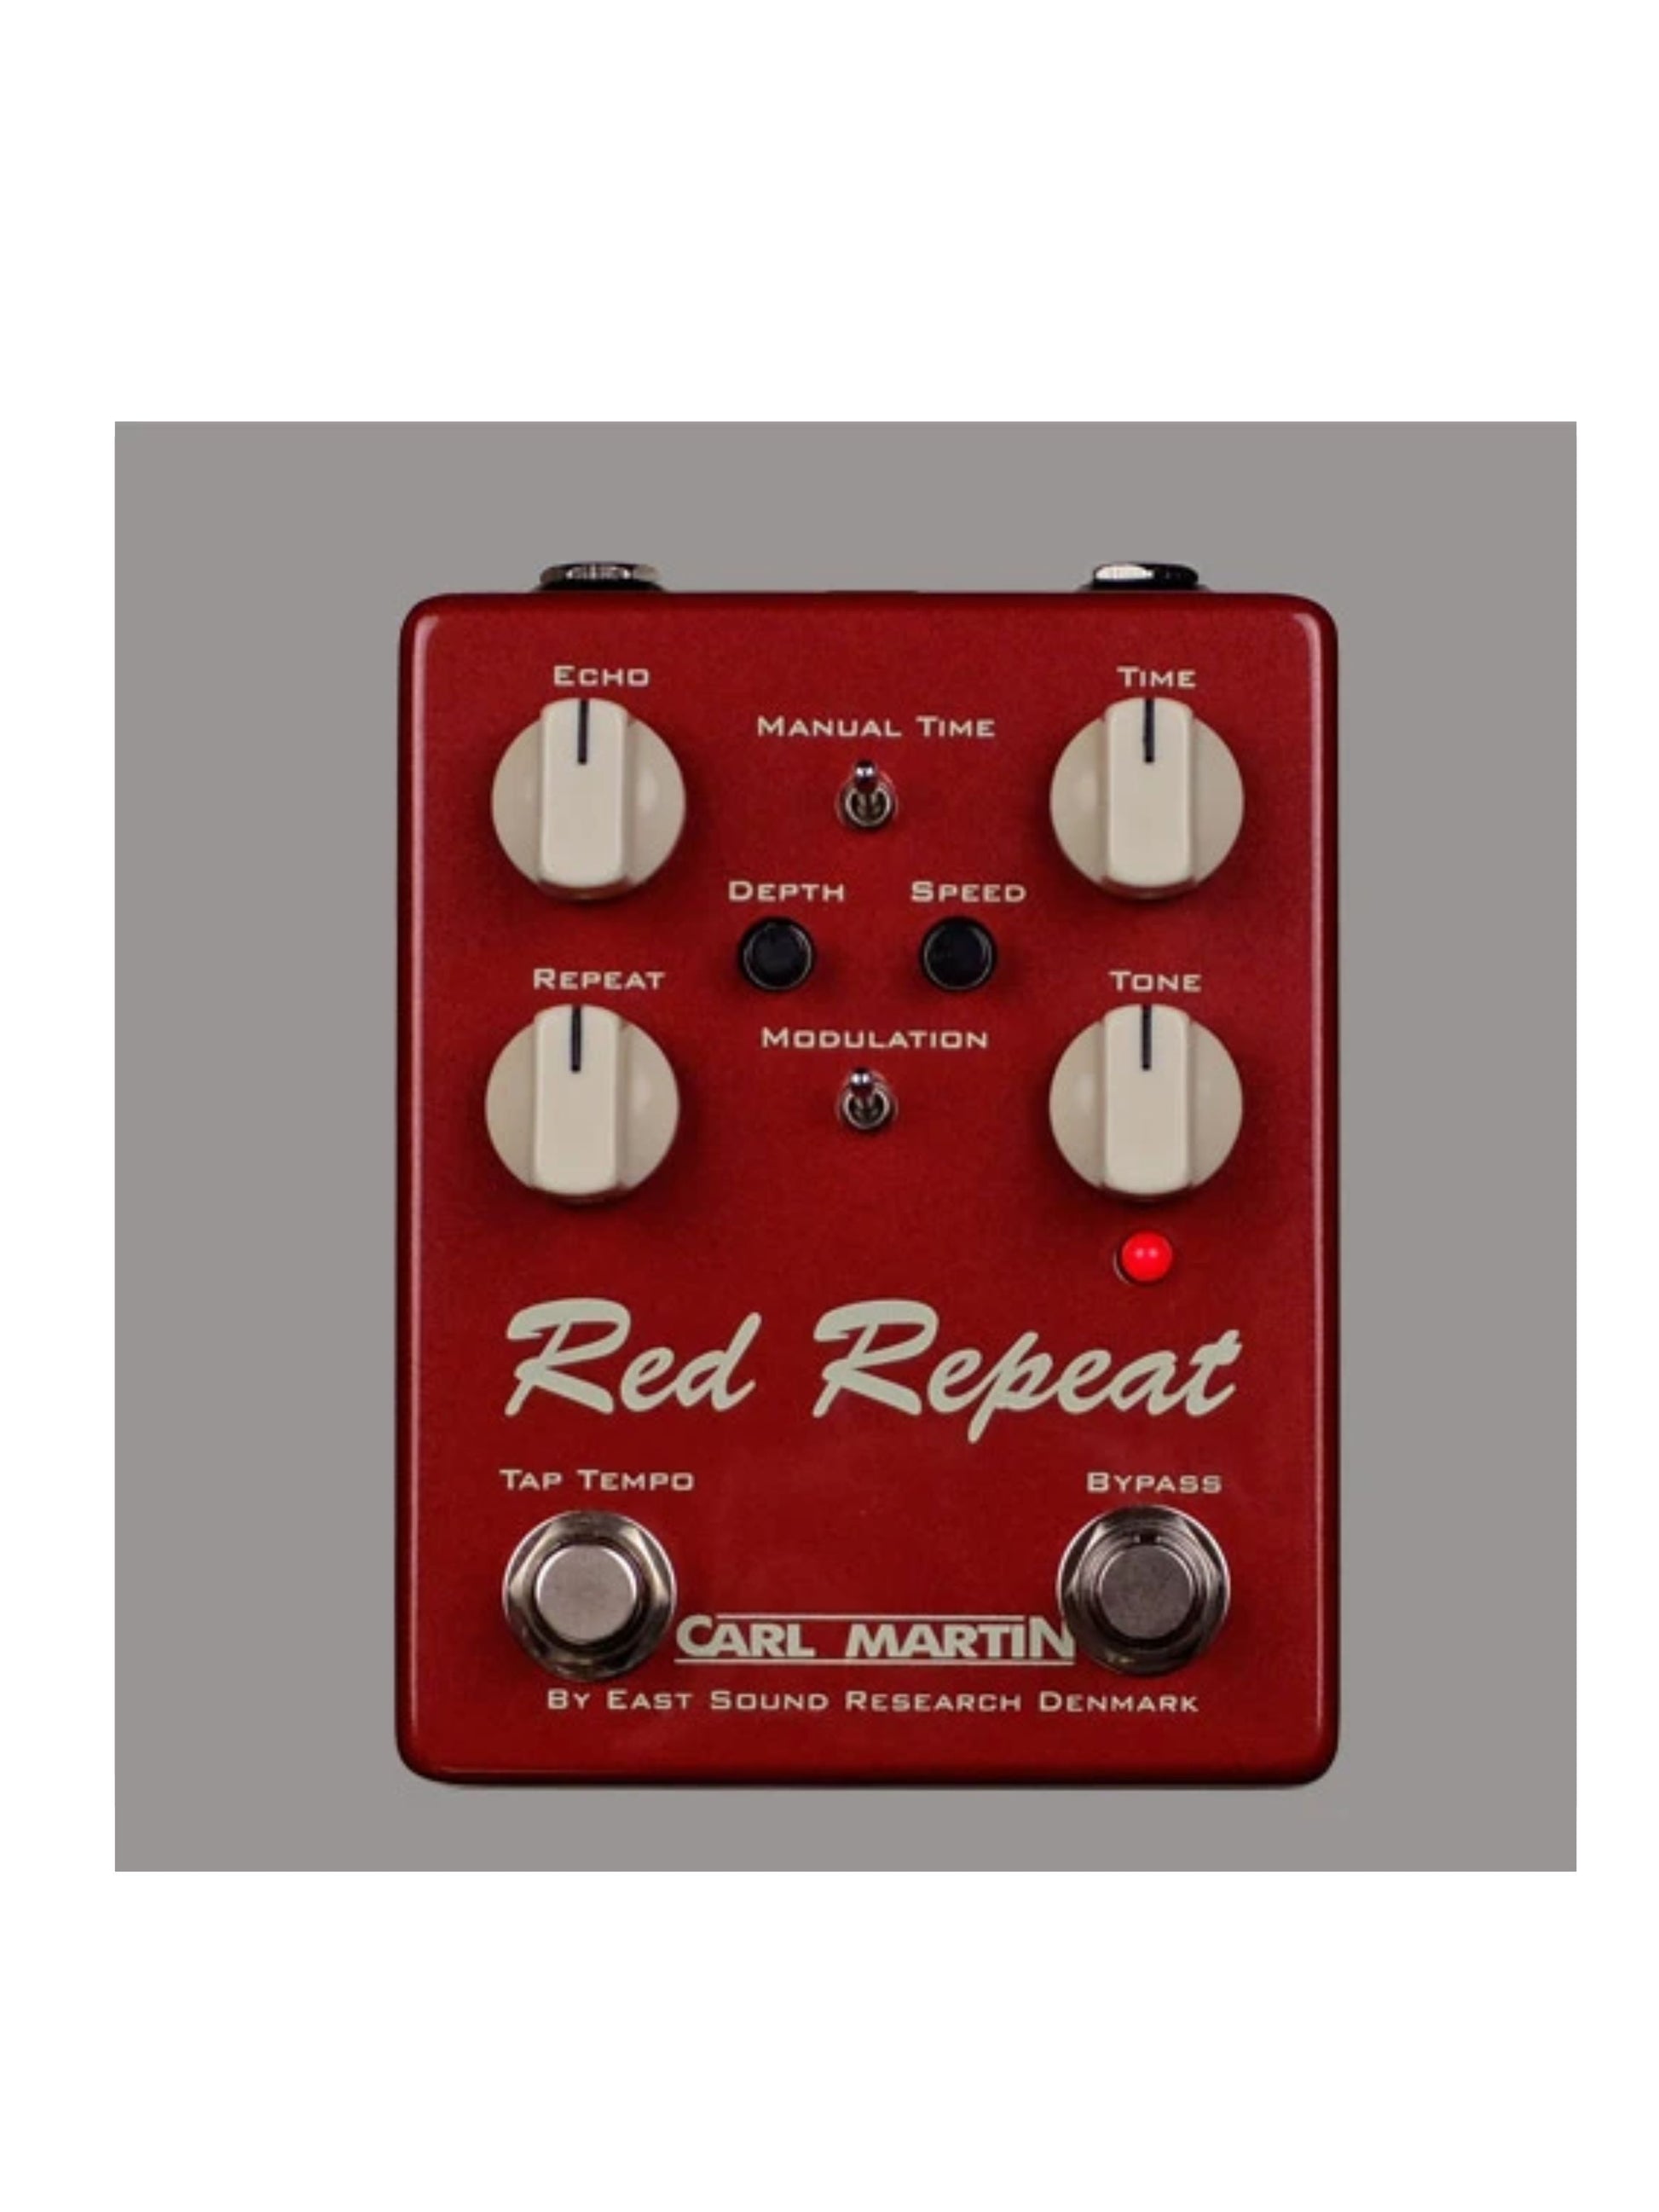 Carl Martin Red Repeat Delay / Reverb Bass Pedal